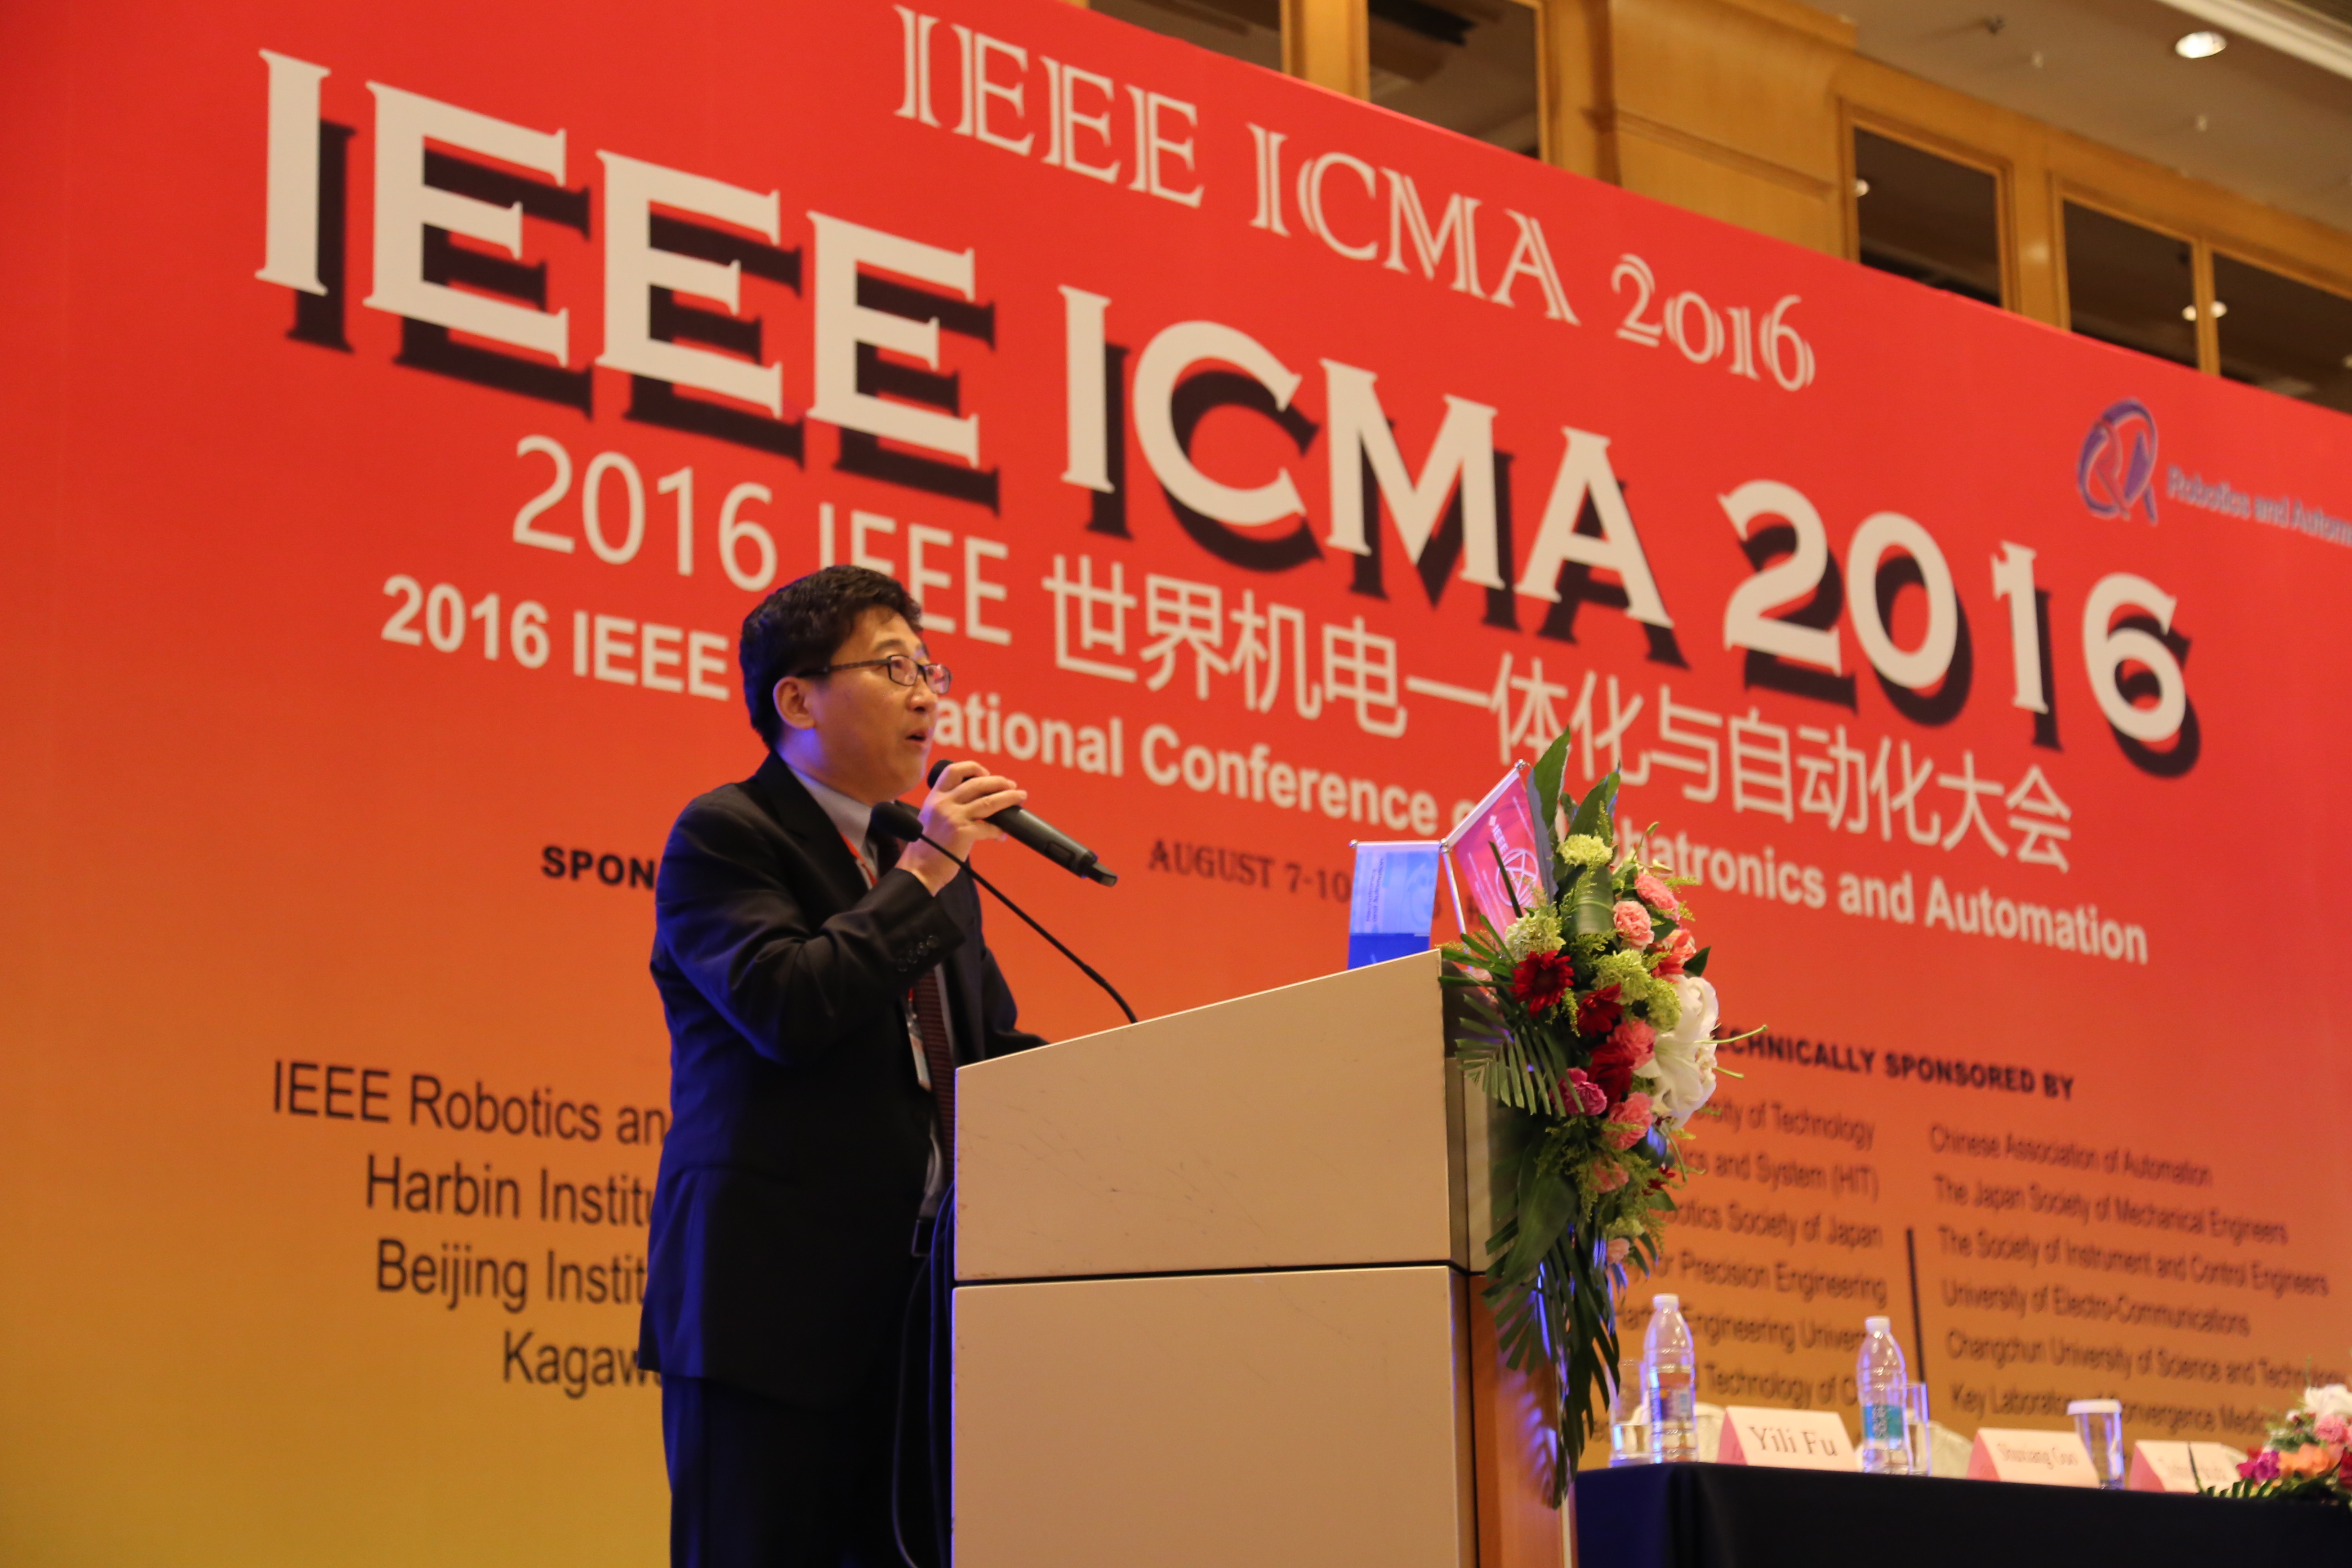 Prof. Guo in IEEE ICMA 2016 Conference